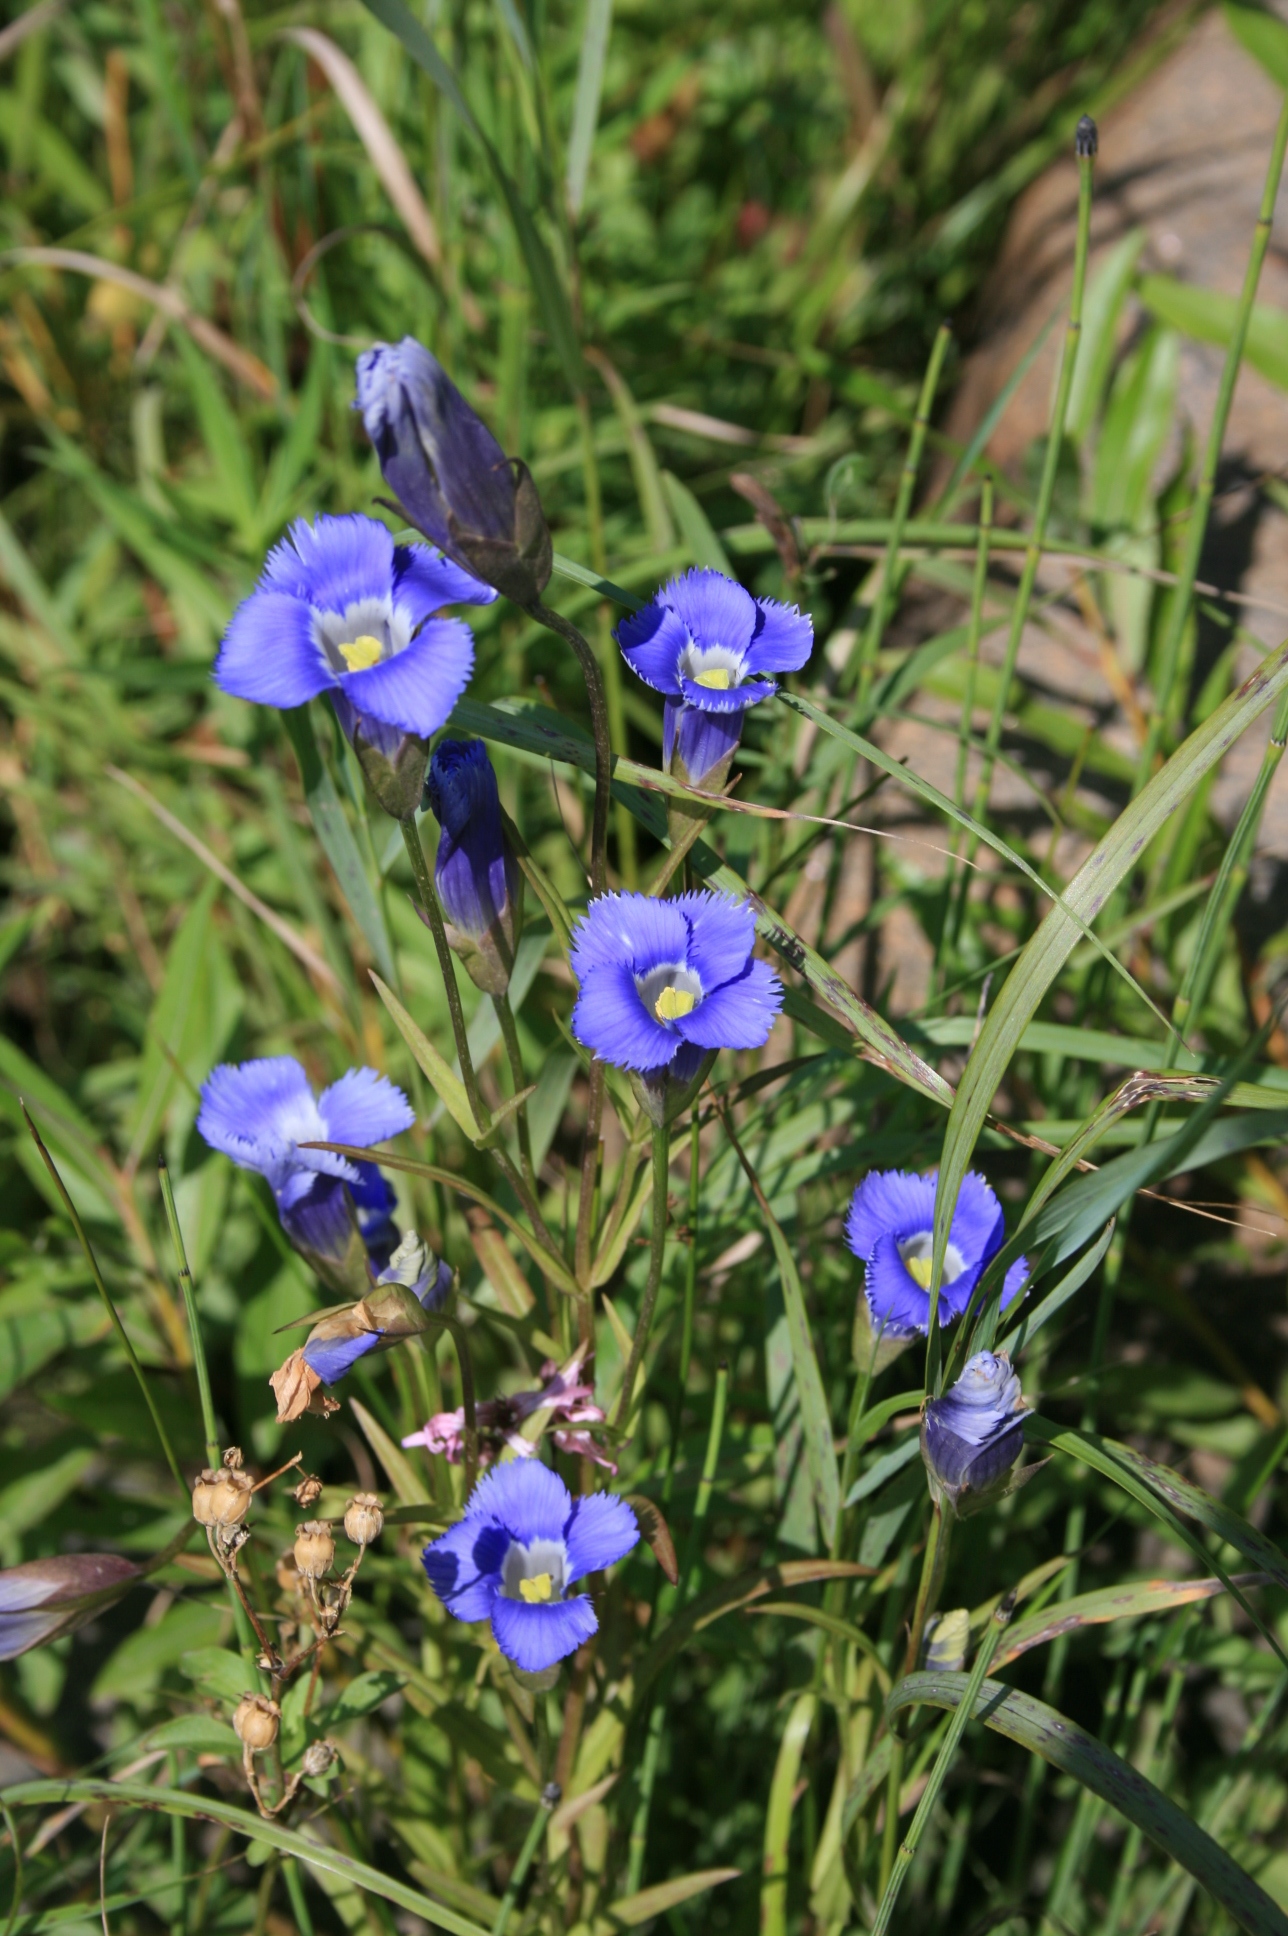 Gentianopsis (Photo: A. Lachance)